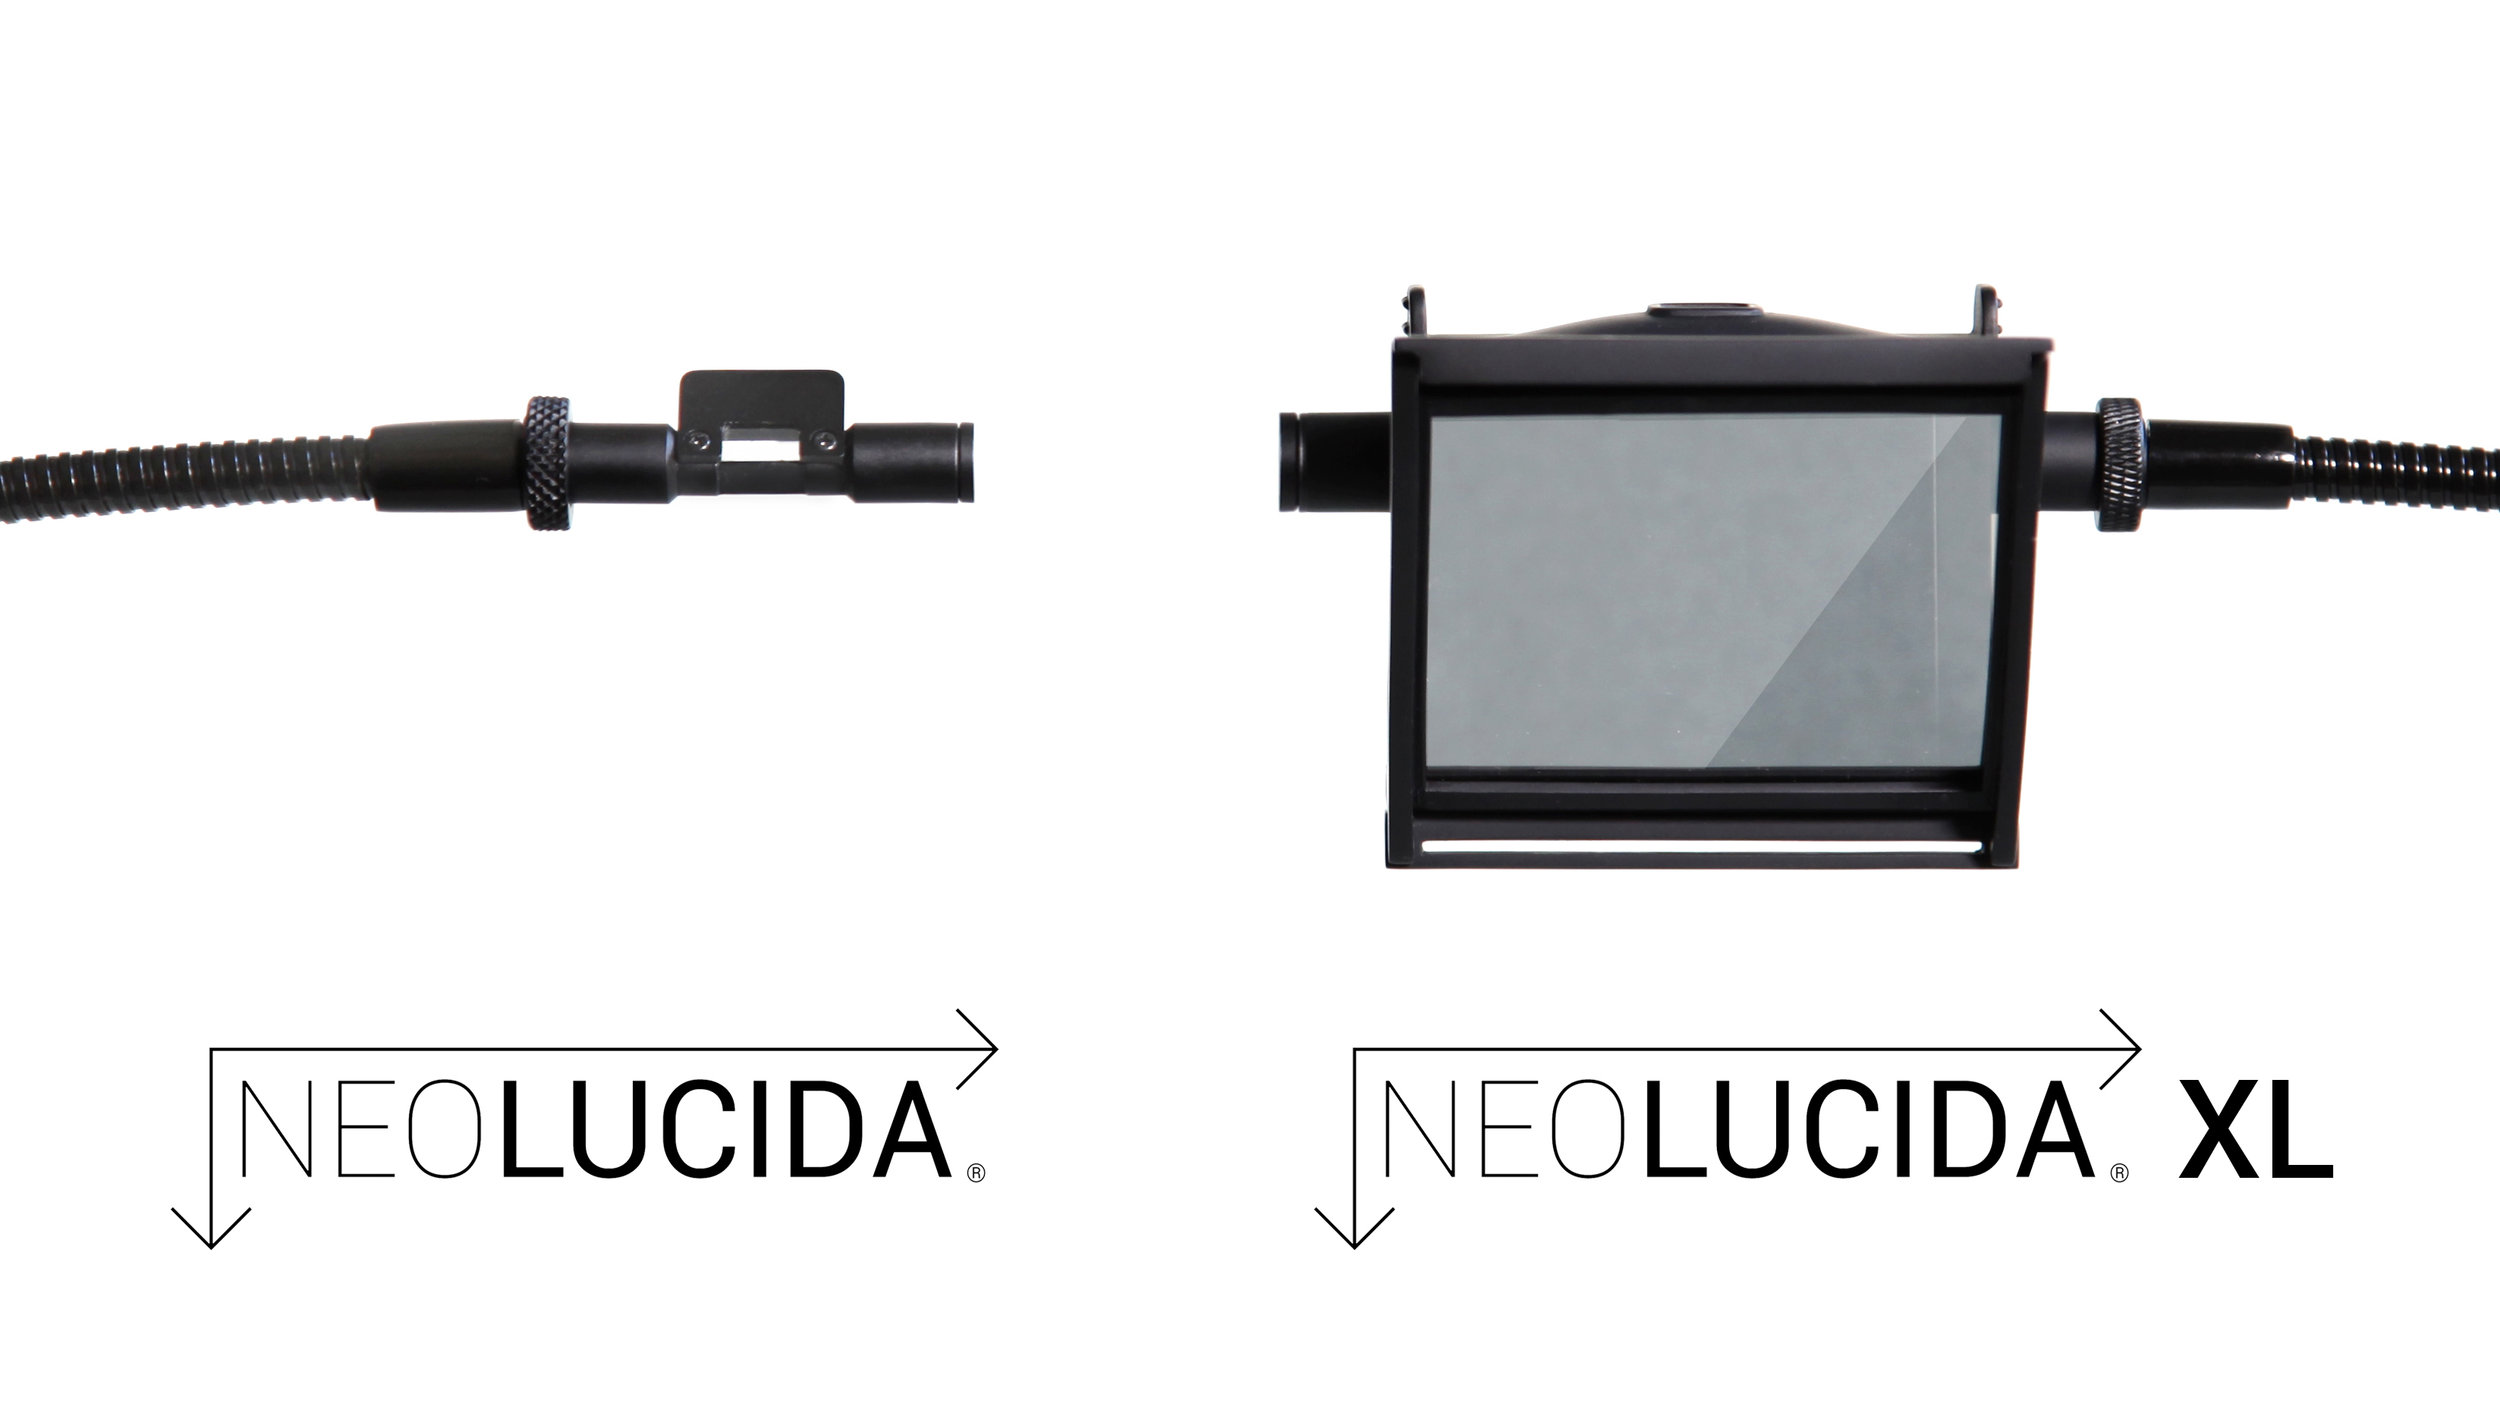 NeoLucida PLUS: the all-new NeoLucida Plus is an optical drawing tool